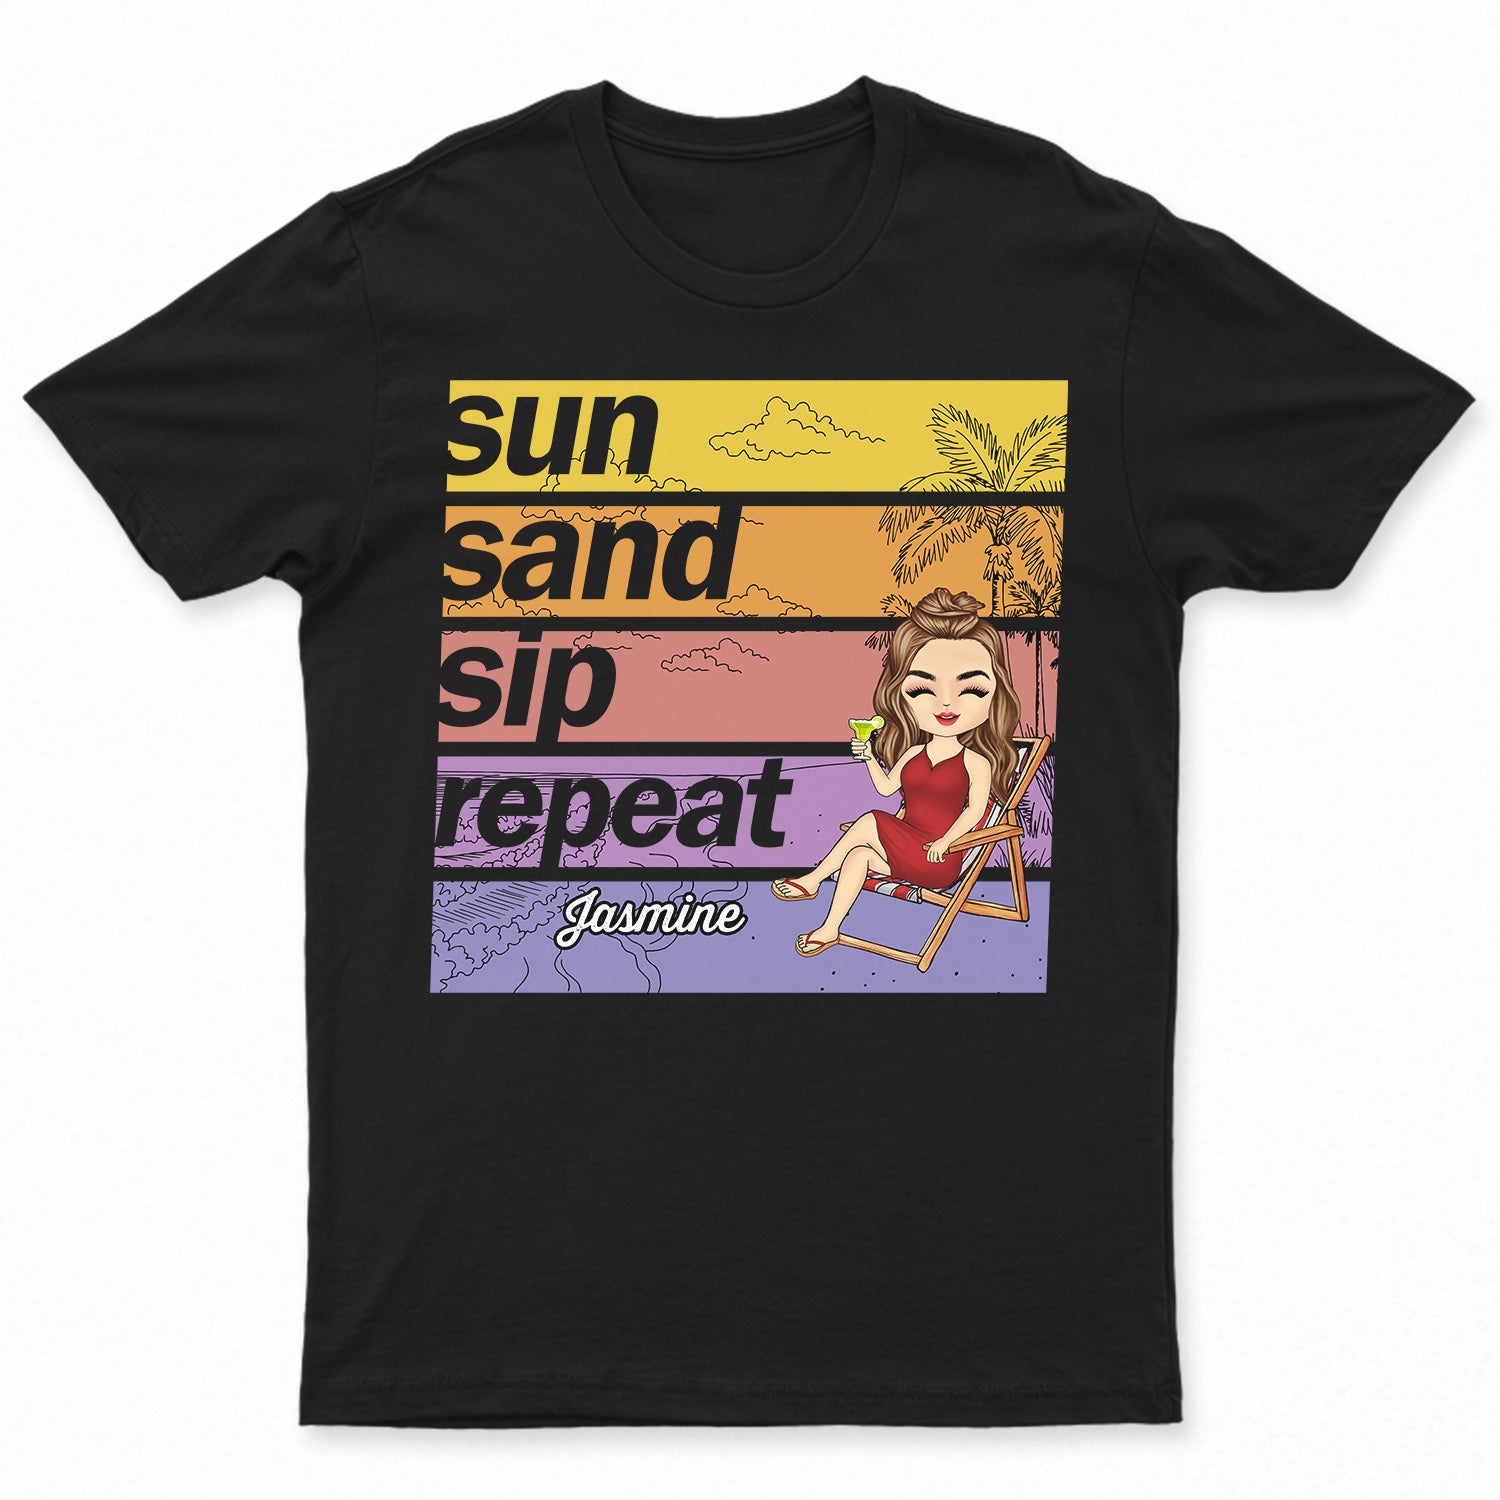 Sun Sand Sip Repeat Beach Vacation - Birthday, Summer Gift For Him, Her, Yourself, Girlfriend, Boyfriend, BFF Best Friends, Traveling Lovers - Personalized Custom T Shirt